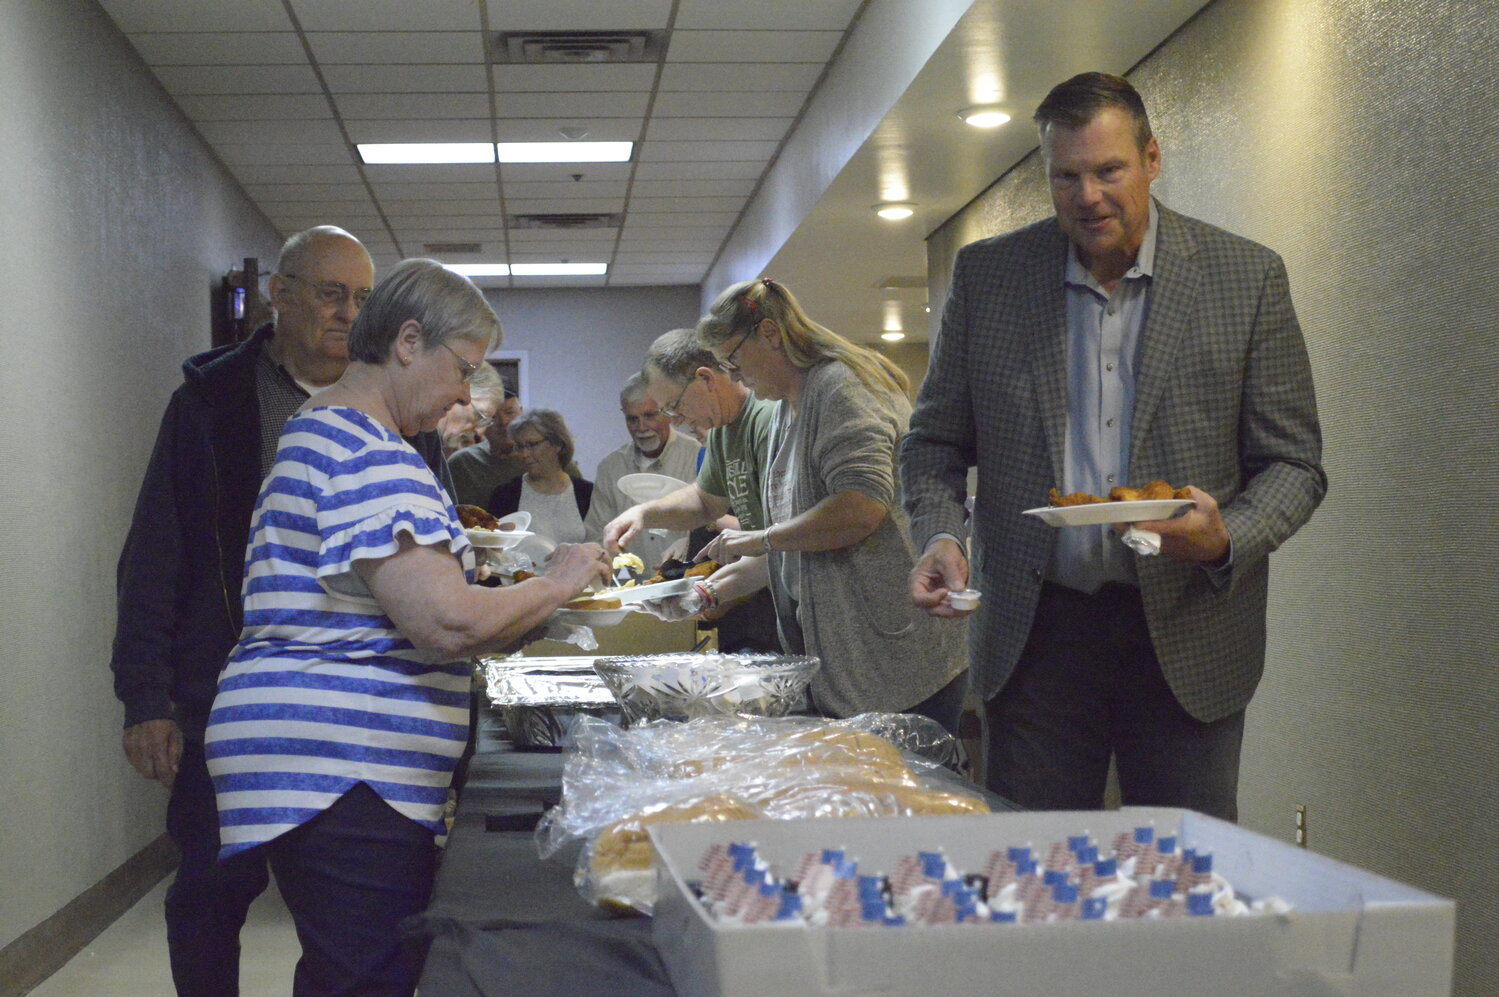 Kansas Attorney General Kris Kobach (right) grabs himself a plate of fried chicken Saturday night during the Crawford County Republican Party’s Dinner and Discussion event.